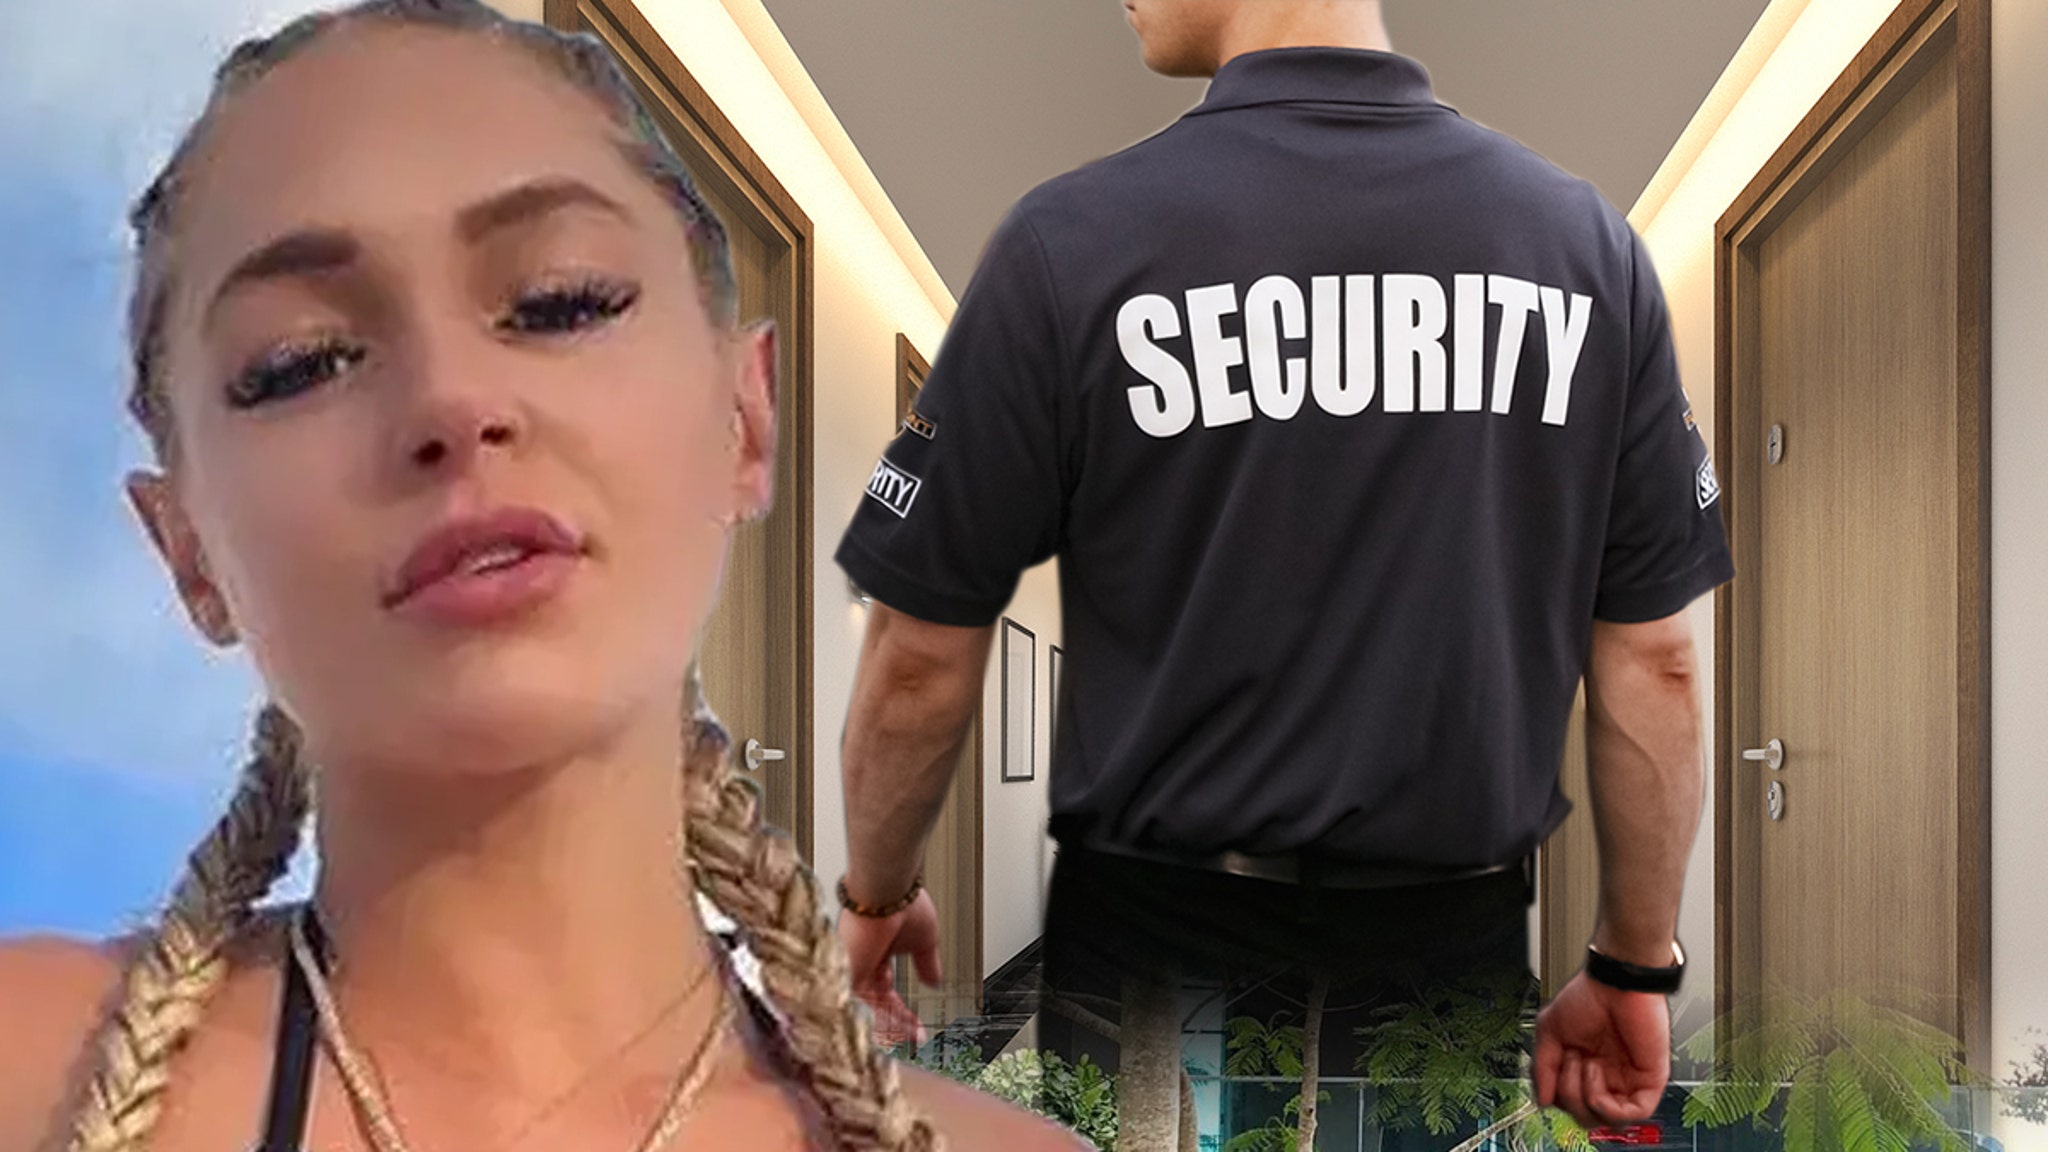 OnlyFans Model Courtney Clenney Had Security at Front Door as BF Was Killed, Lawsuit Says